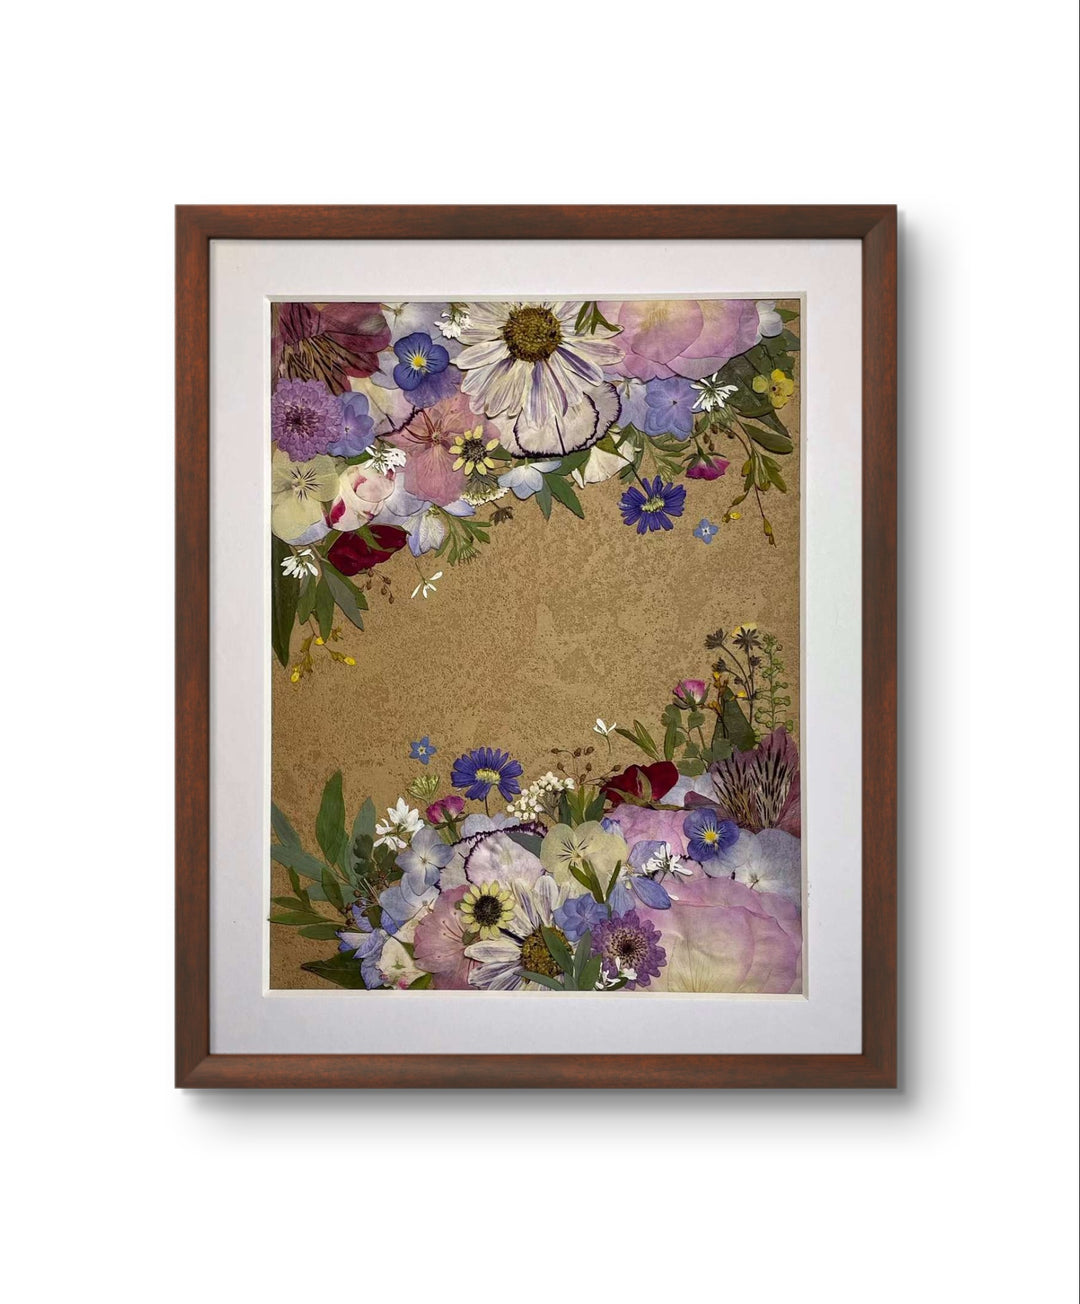 Garden symphony theme 11 inches width 12.5 inches height pressed flower frame art.